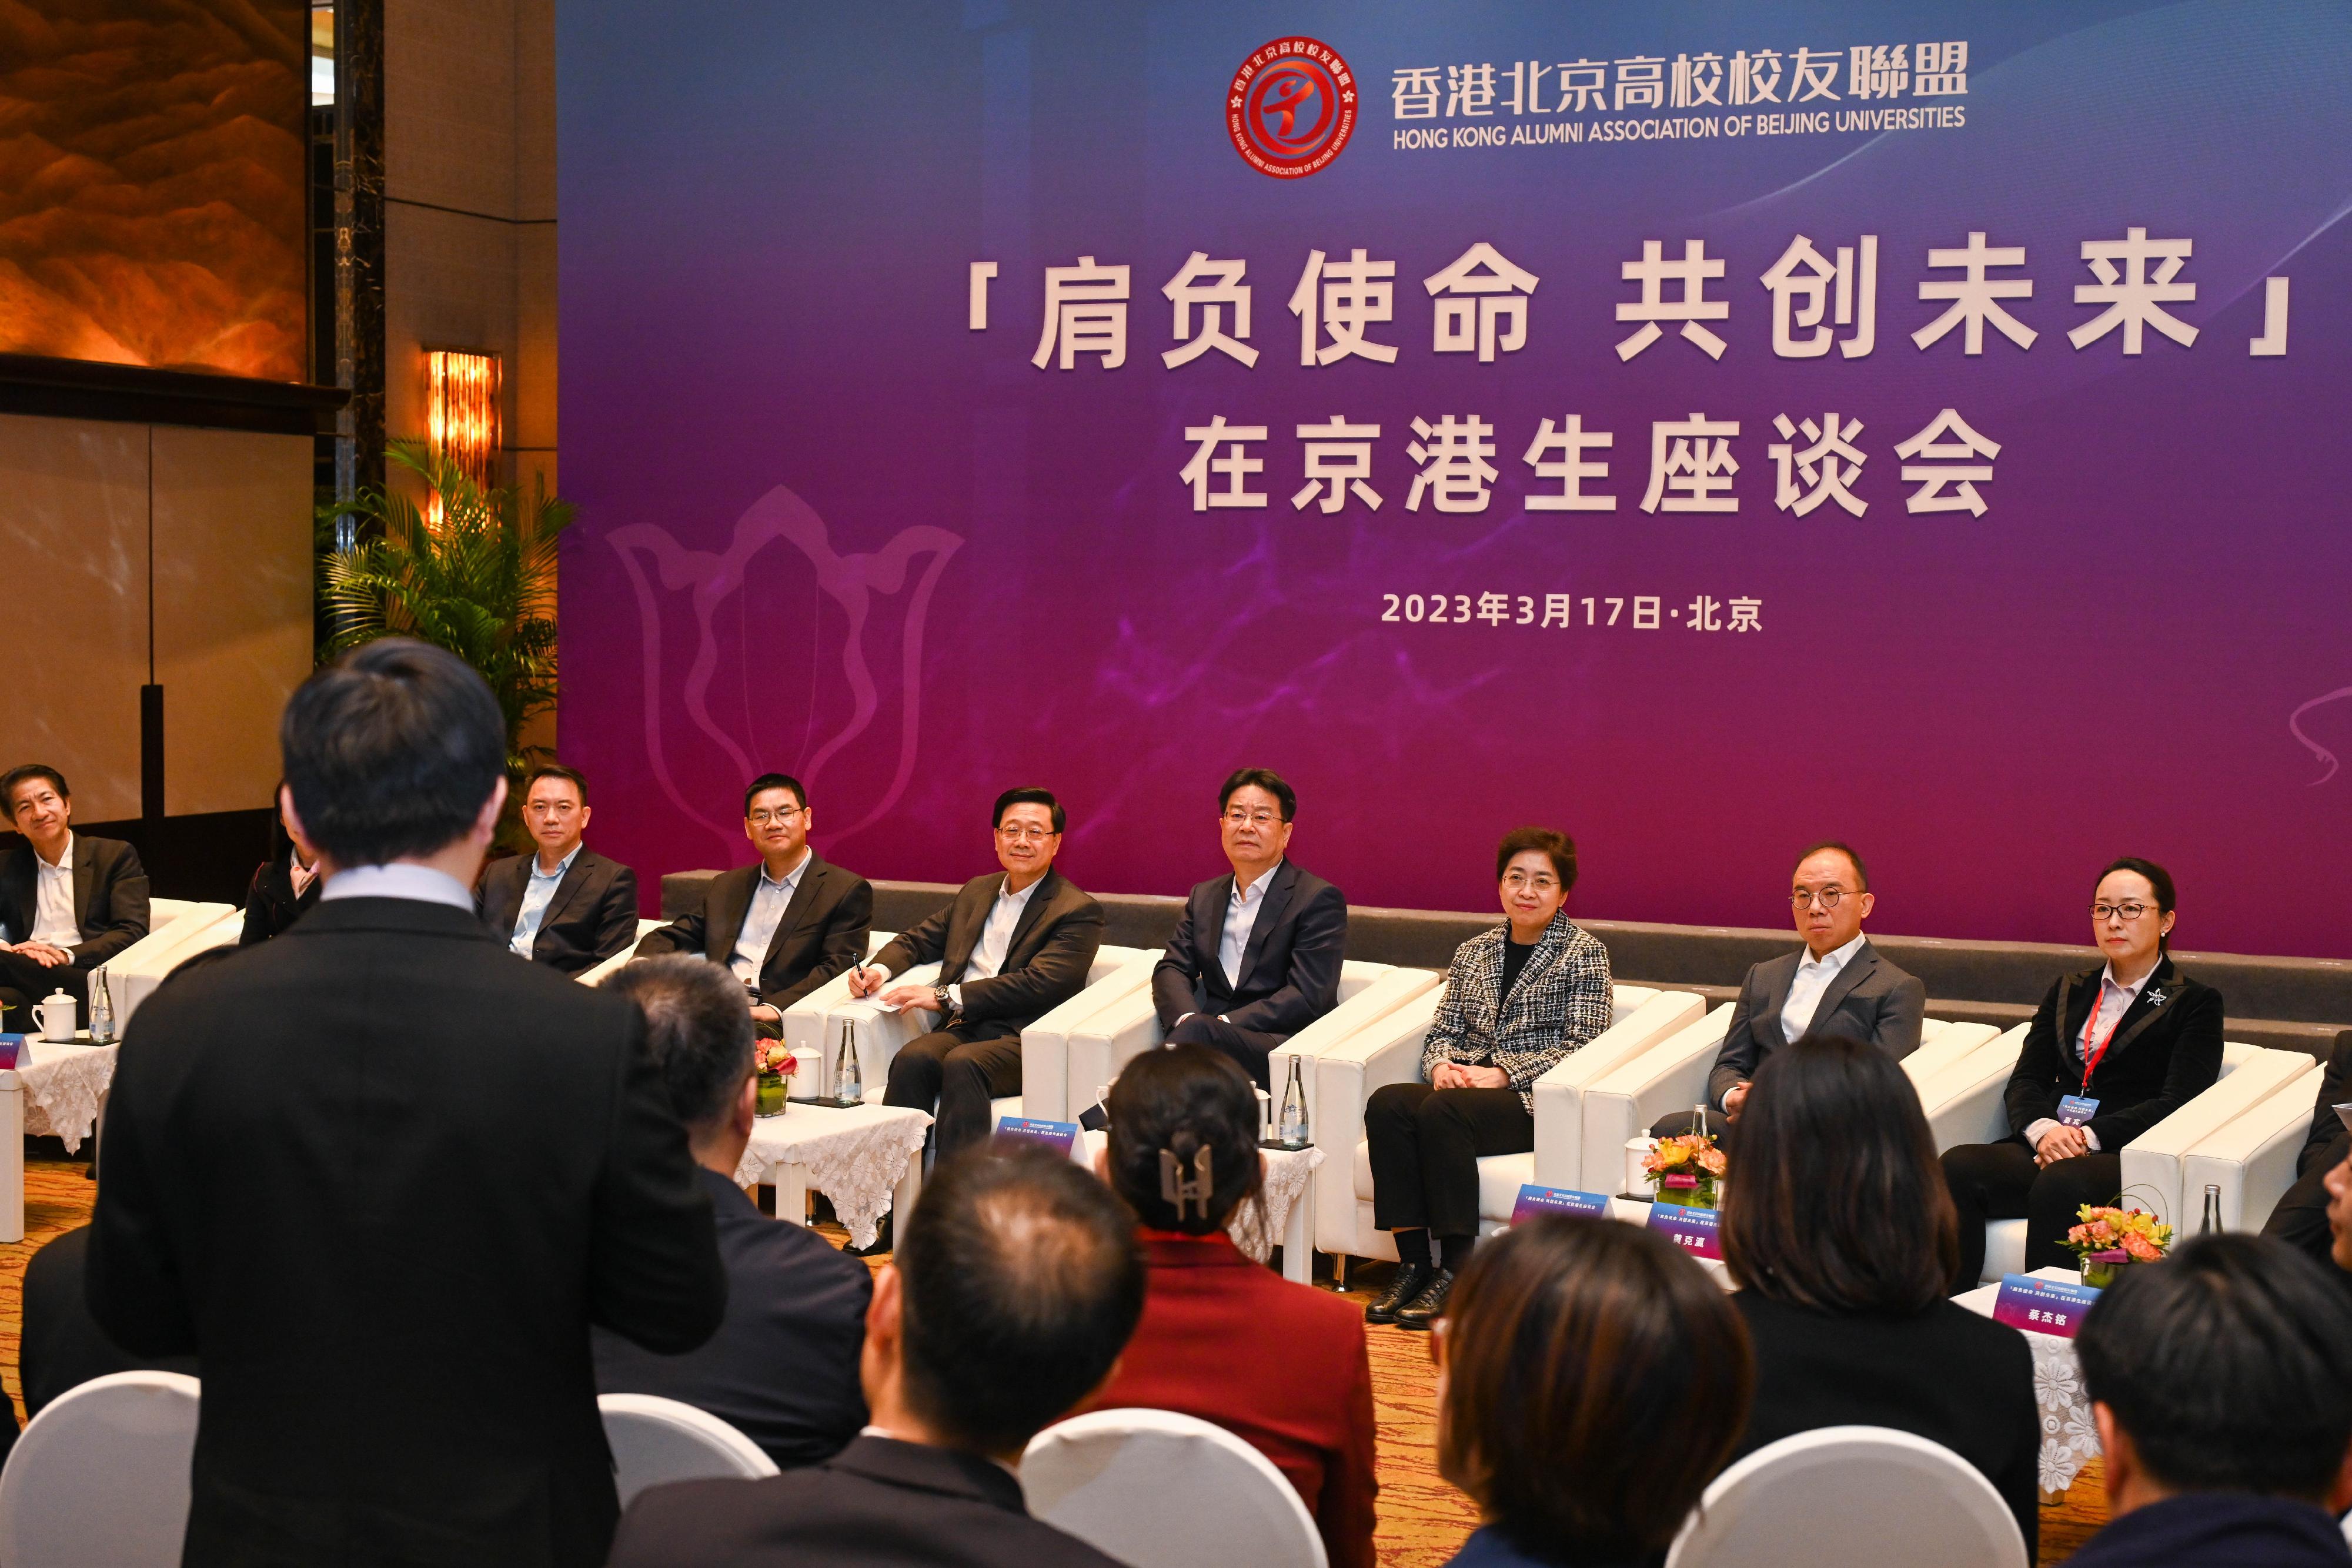 The Chief Executive, Mr John Lee (fifth right), attended a seminar organised by the Hong Kong Alumni Association of Beijing Universities in Beijing today (March 17). Also joining the seminar is the Secretary for Constitutional and Mainland Affairs, Mr Erick Tsang Kwok-wai (second right).